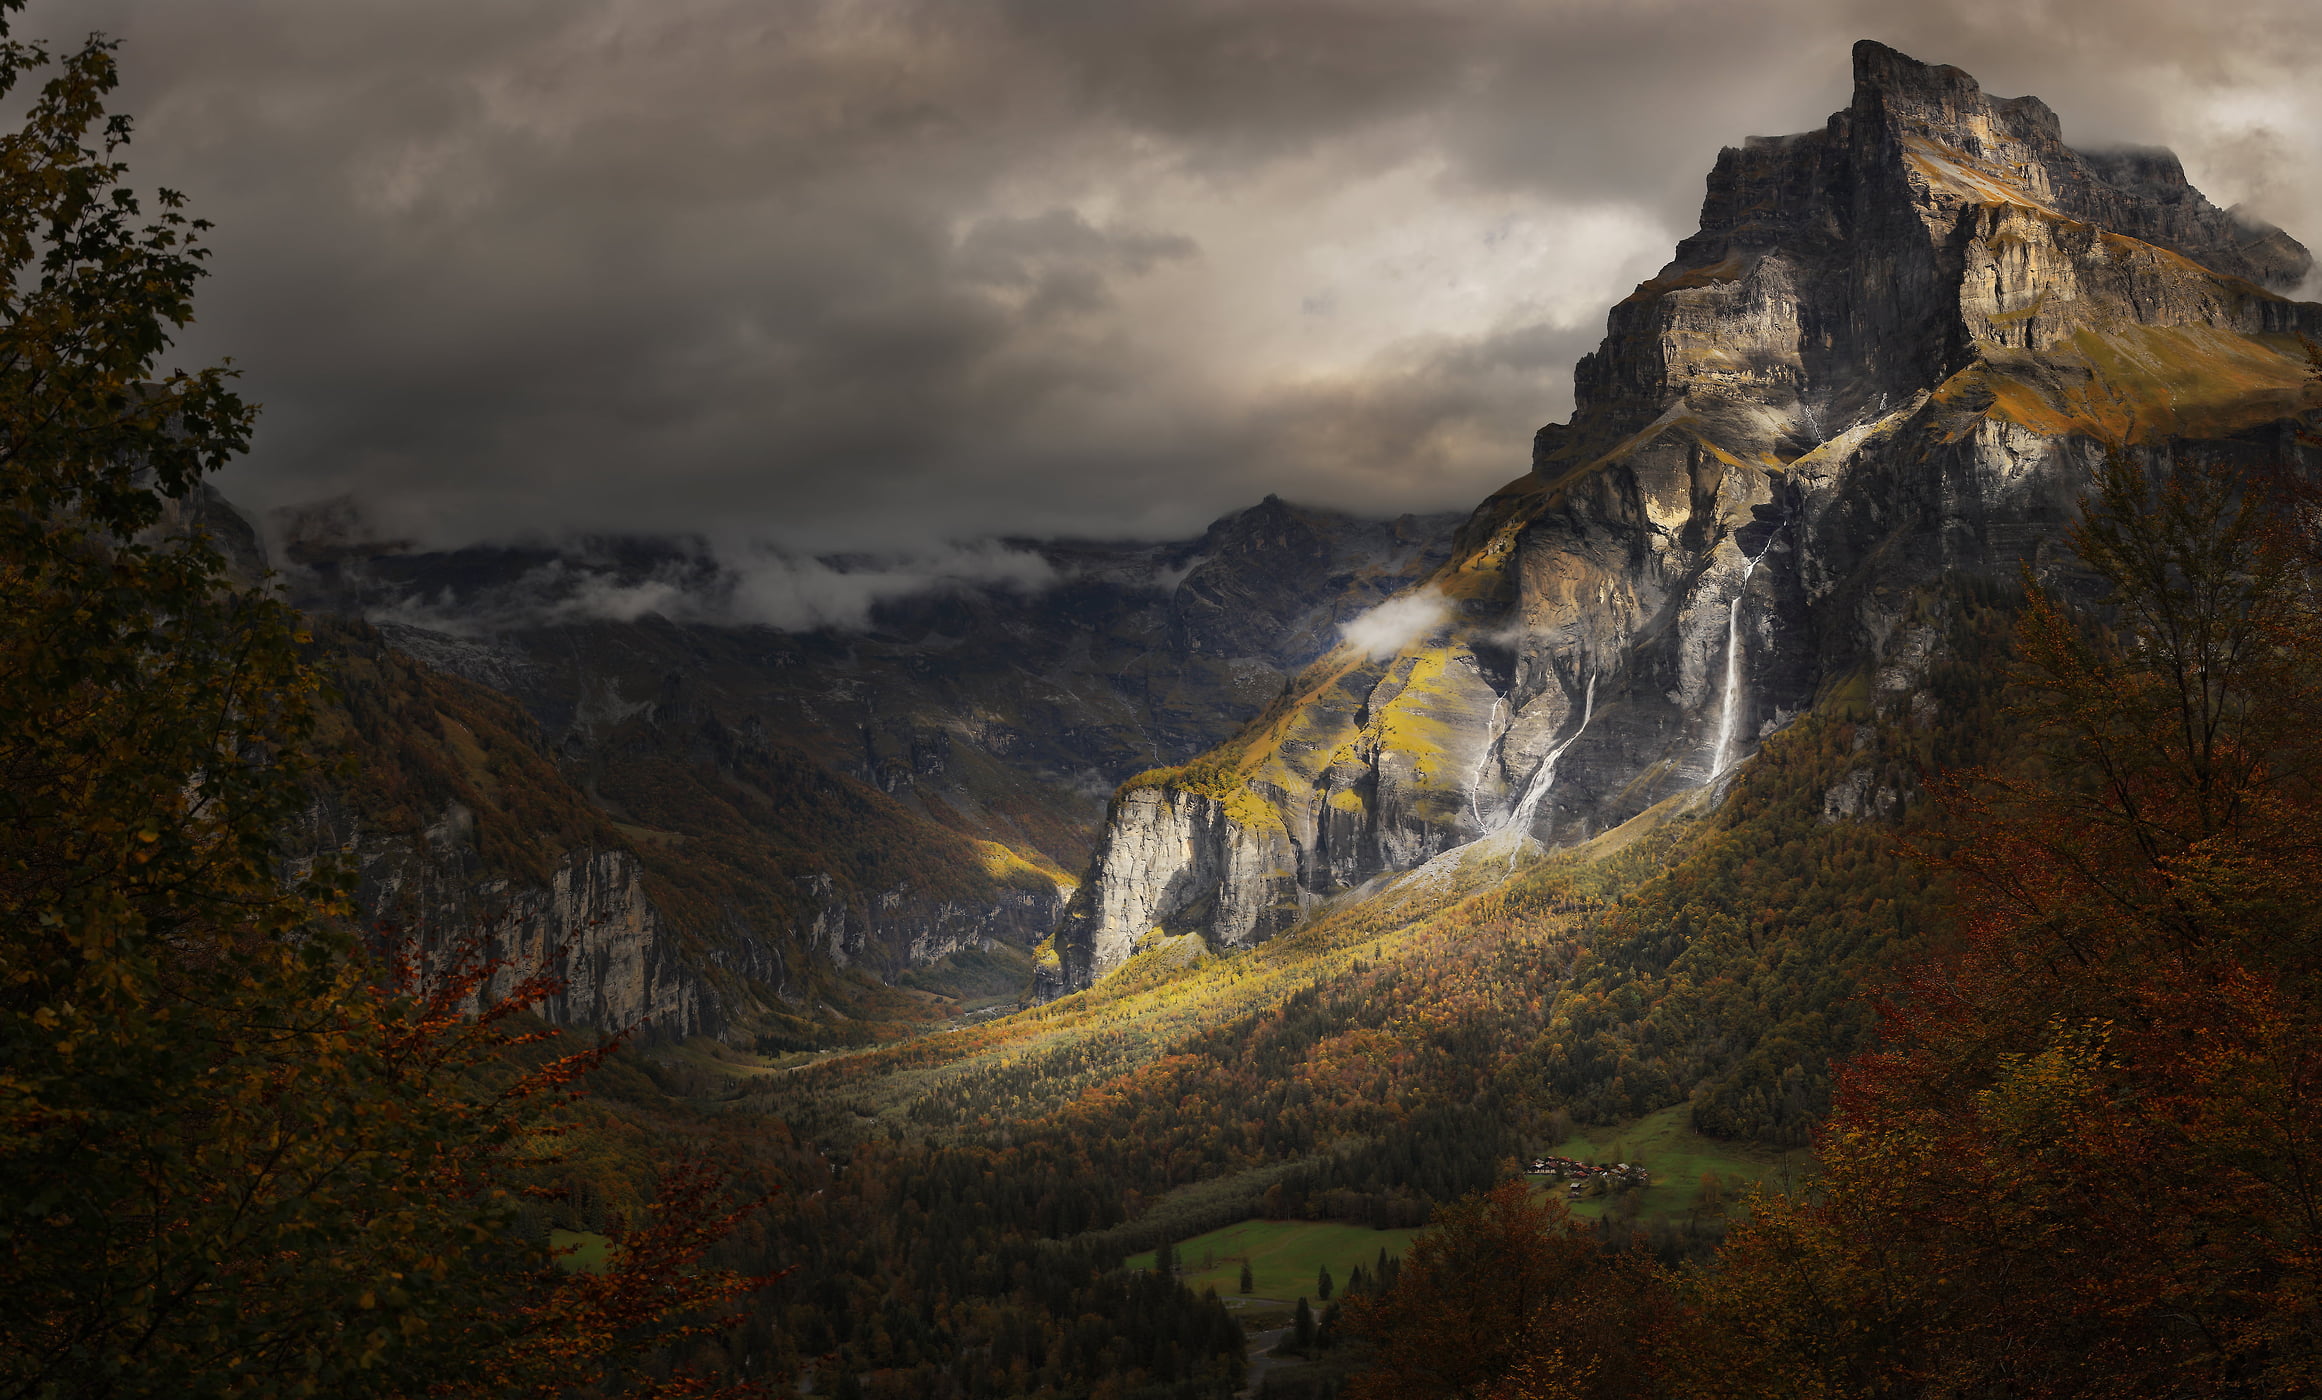 101 megapixels! A very high resolution, large-format VAST photo of a dark landscape with a mountain, waterfalls, and forests; fine art print created by Alexandre Deschaumes in Sixt fer à cheval, France.